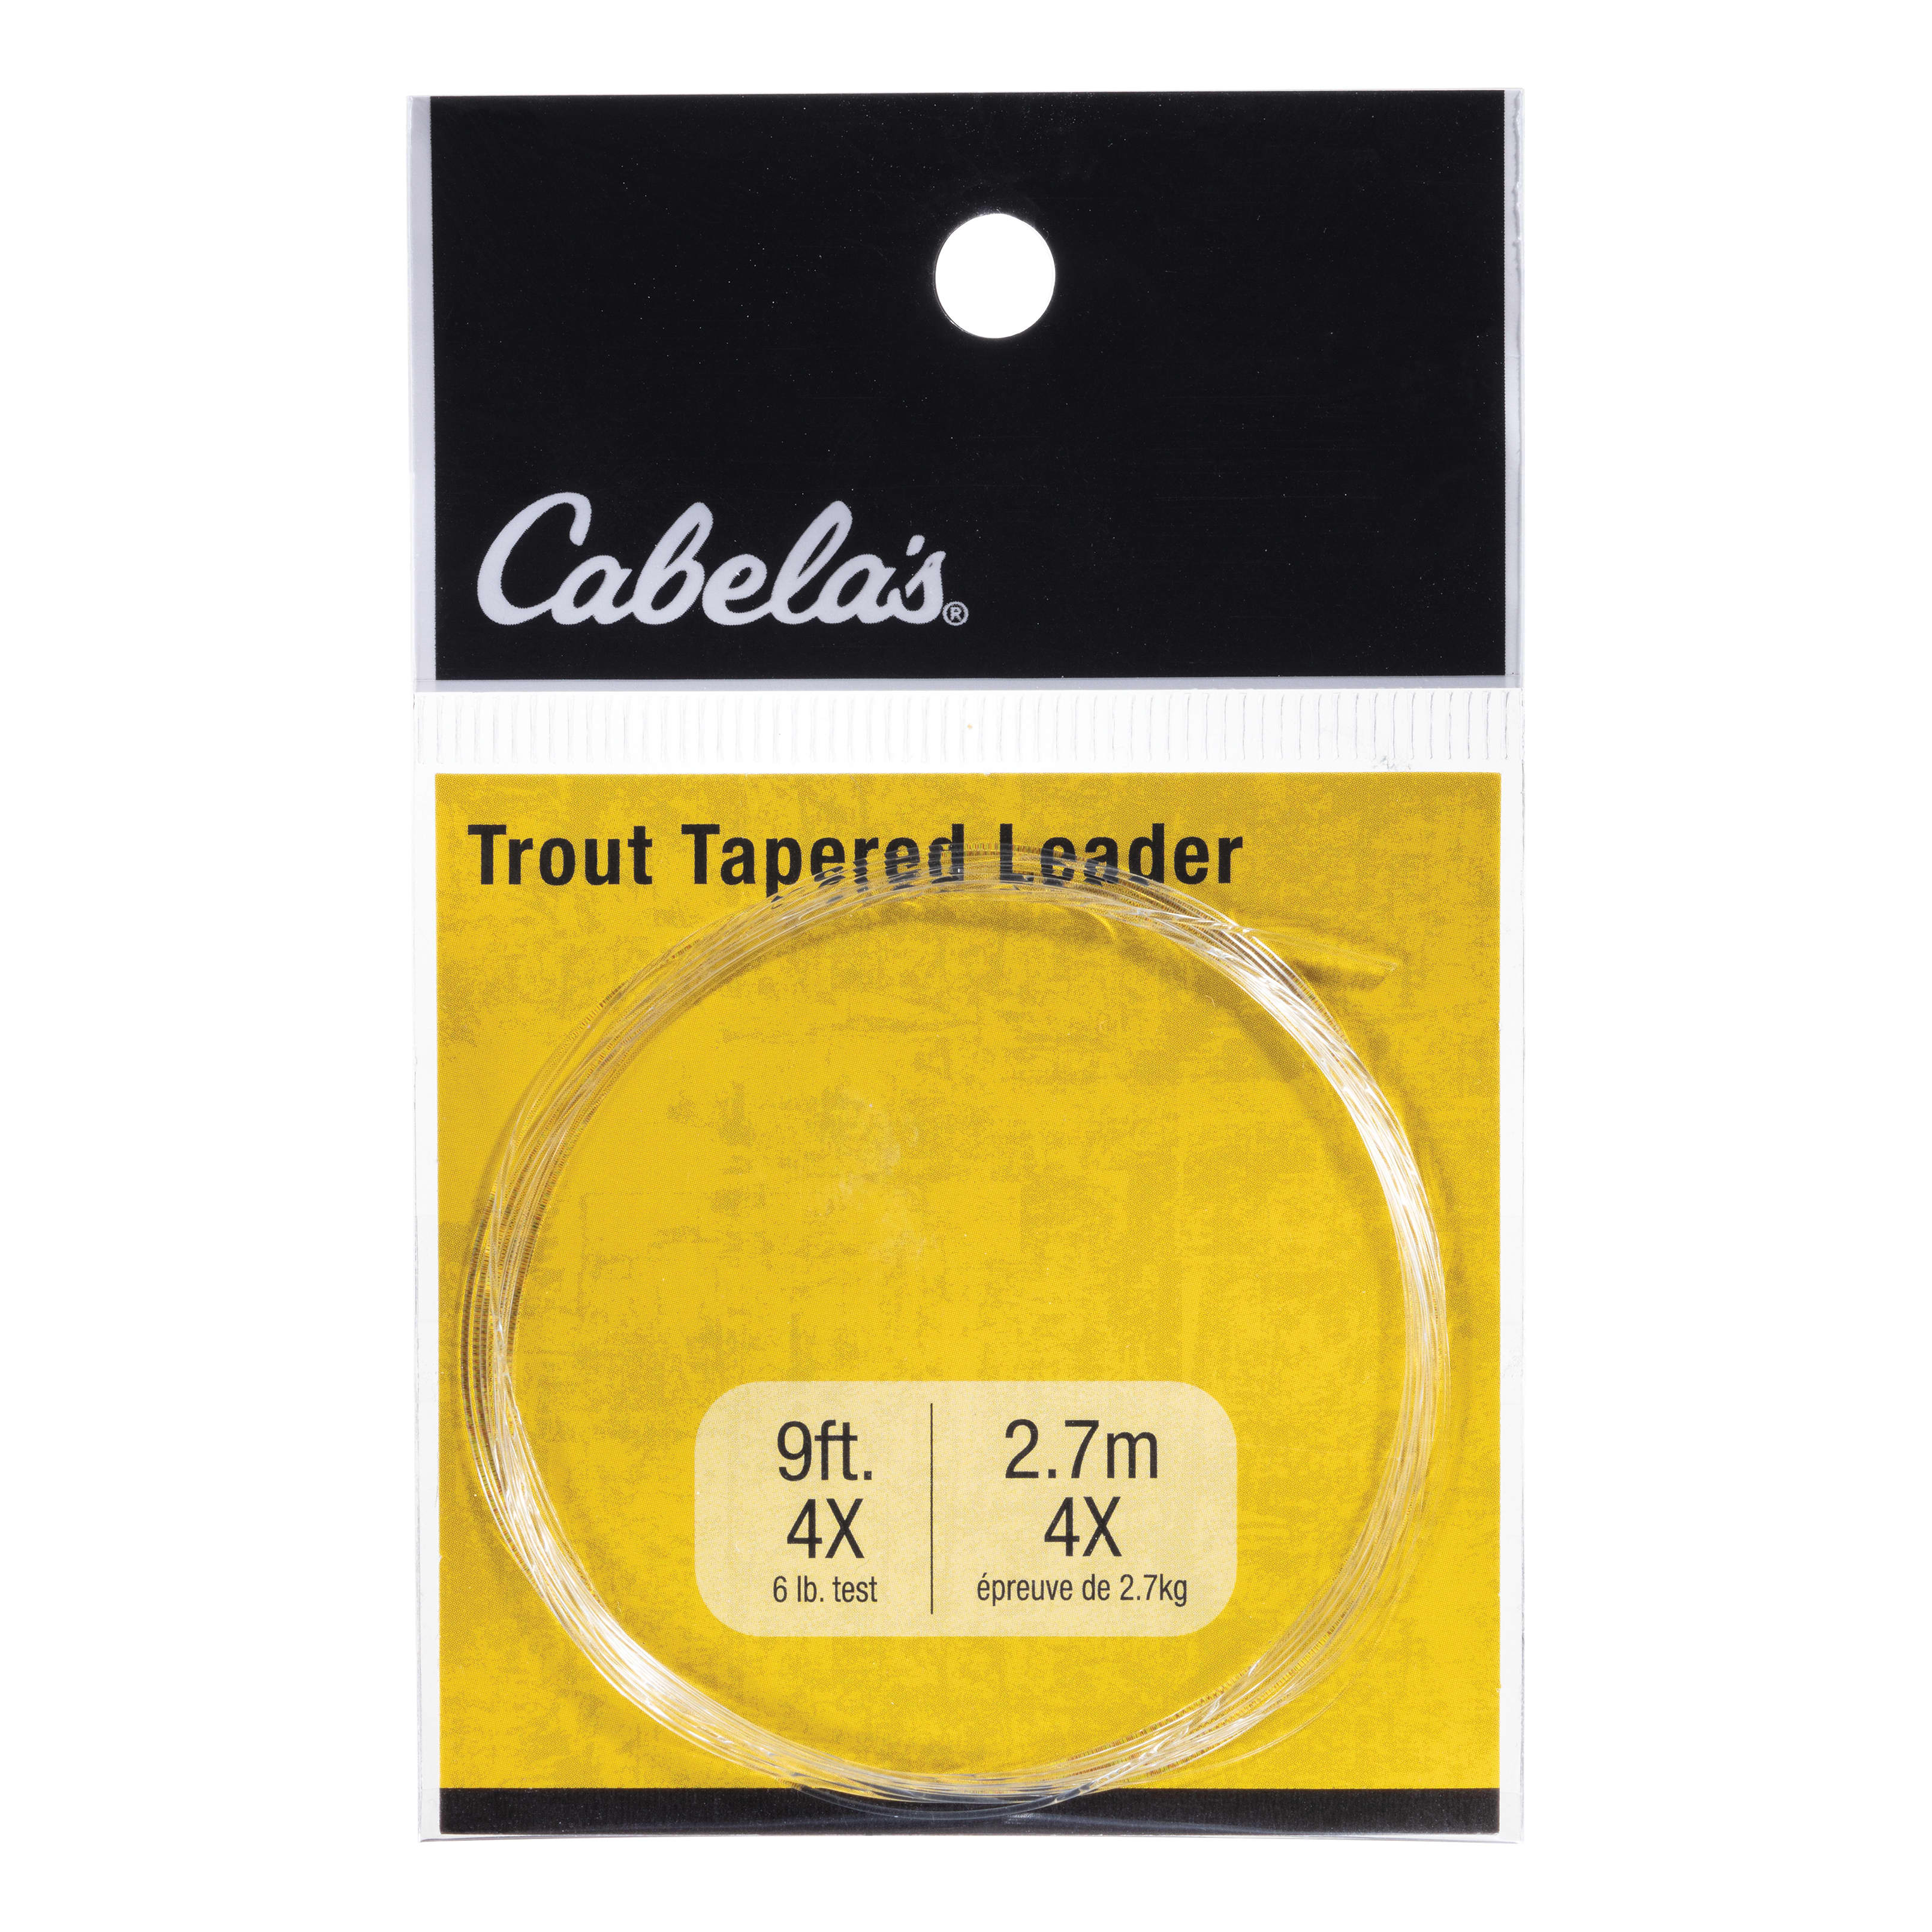 Cabela’s Trout Leader - Cabelas - White RIVER - Leaders, Tippets 